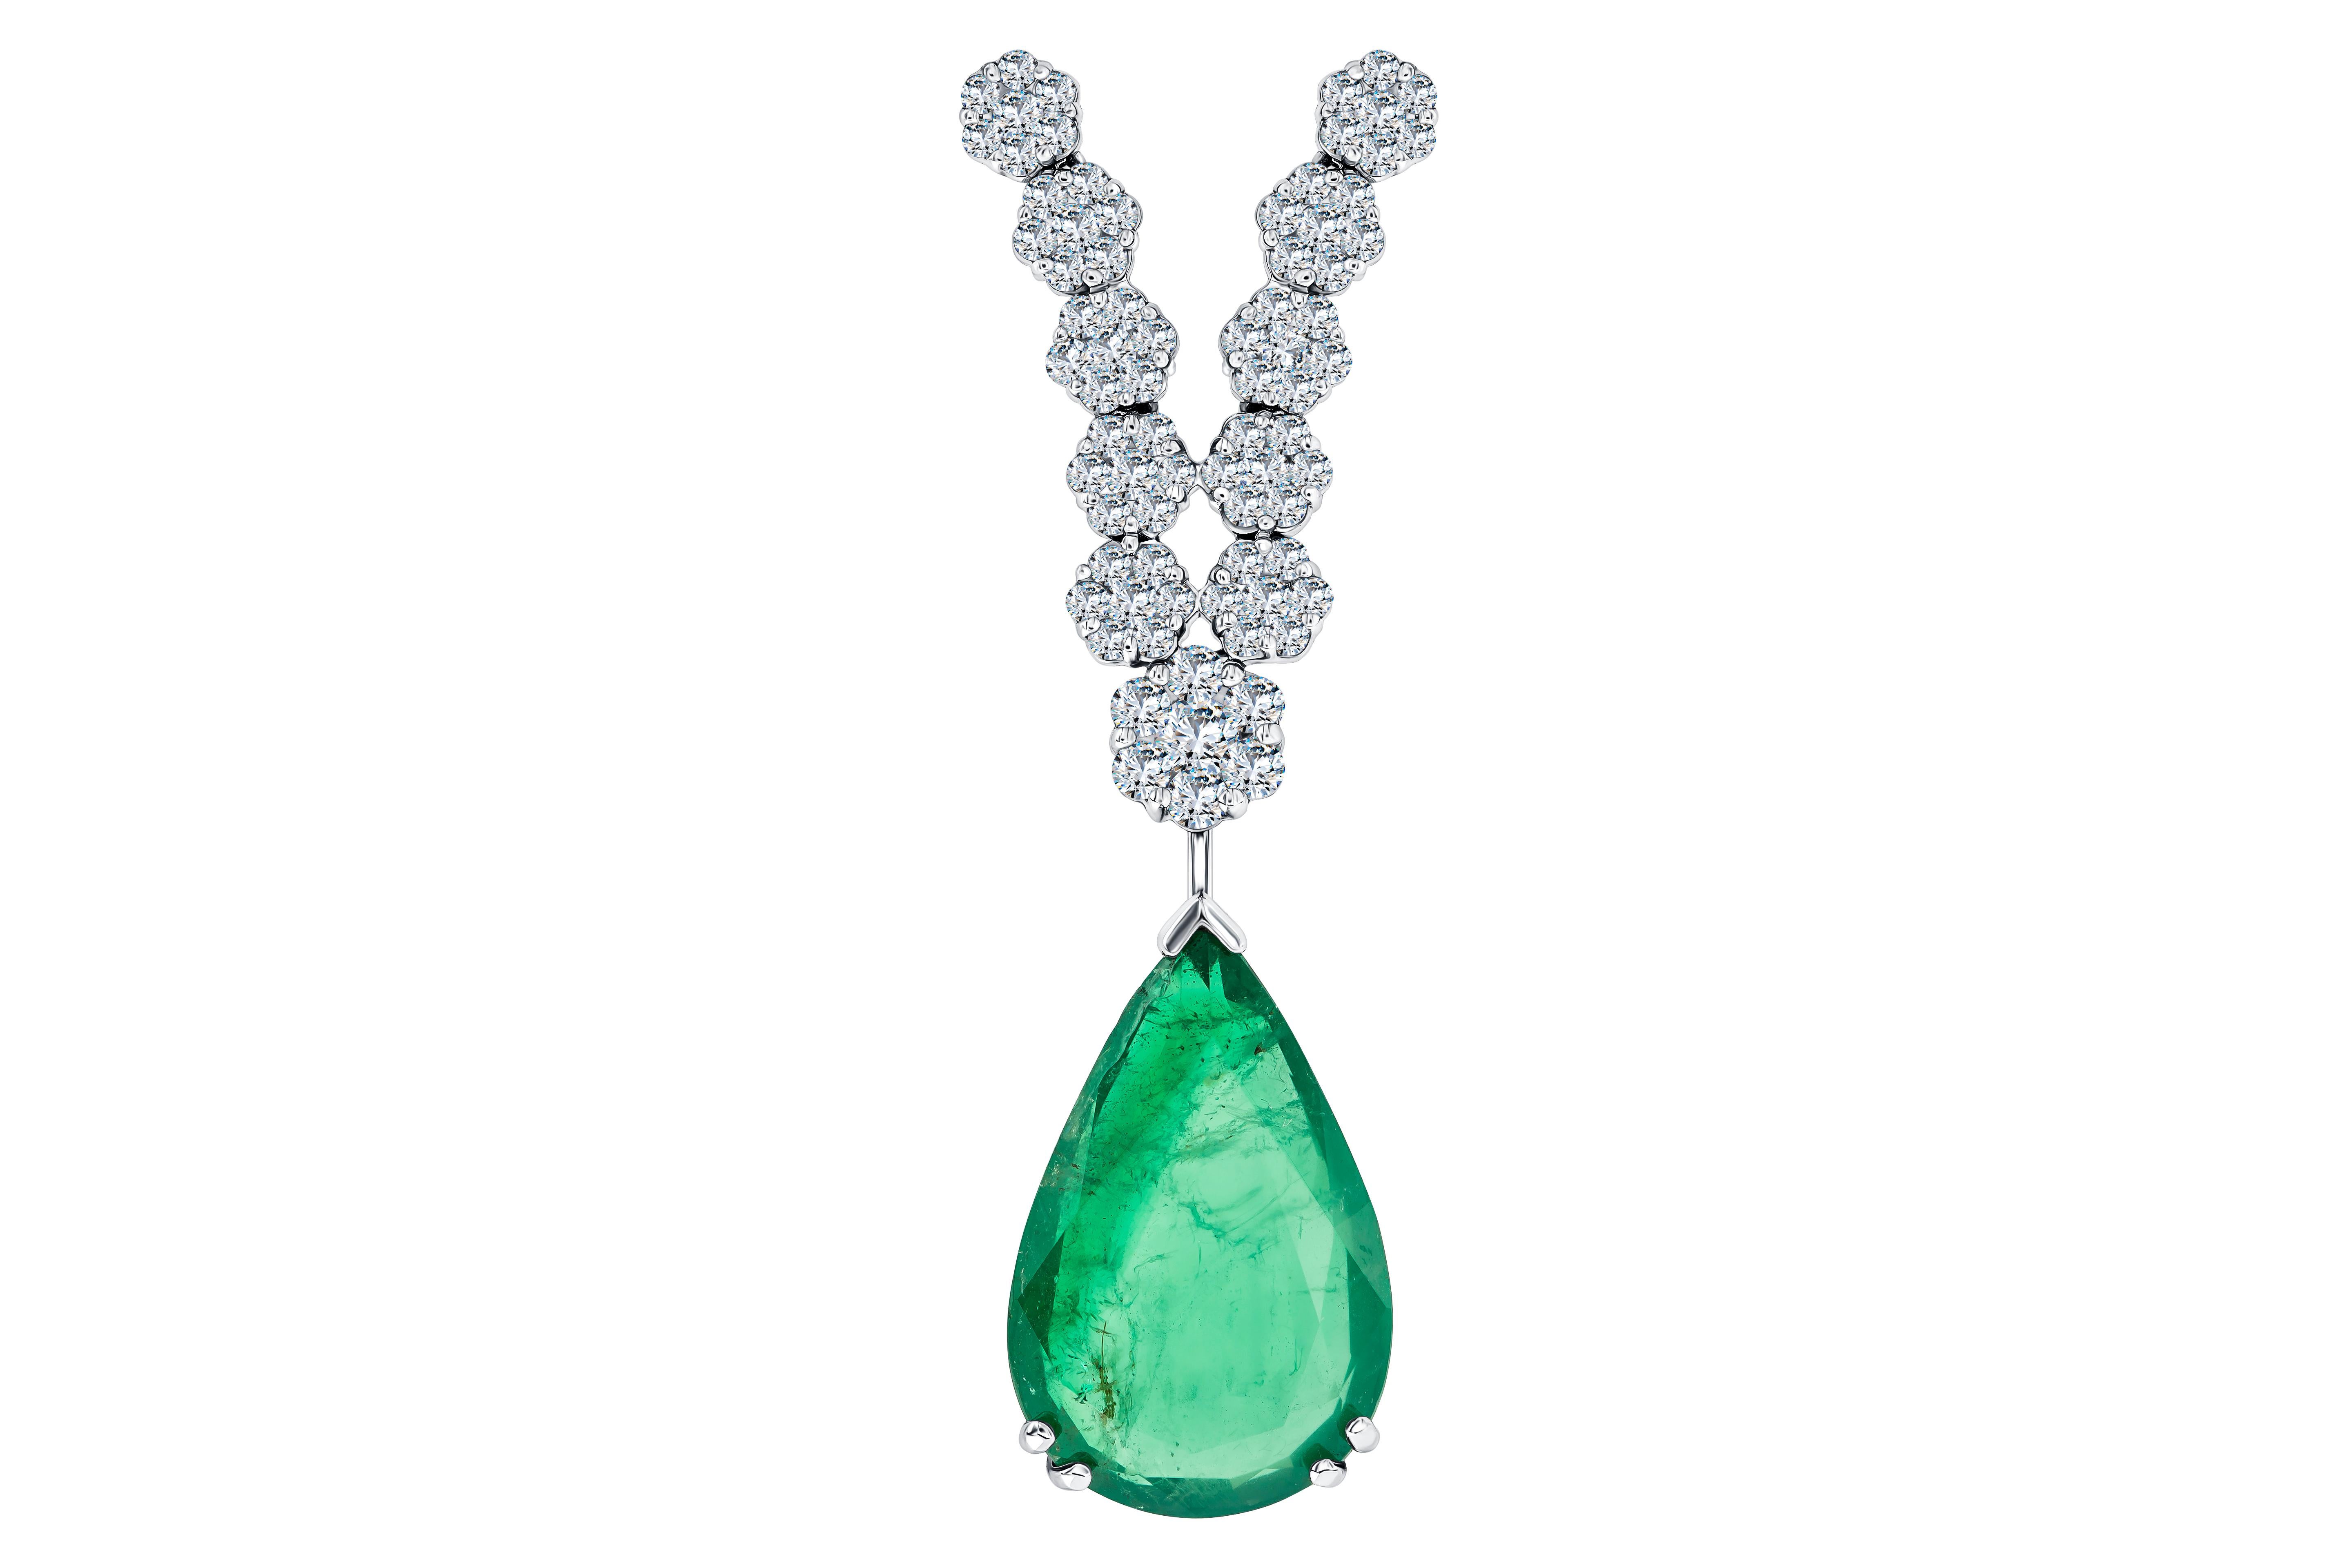 This Exquisite 9.28 Carat Pear shaped Emerald is accentuated by a chain of 16.57 Carats G/H - VS1 graduated Diamond clusters for an elegant but show stopping statement. Finely crafted from 18 Karat White Gold, This Exclusive Diamond necklace is a